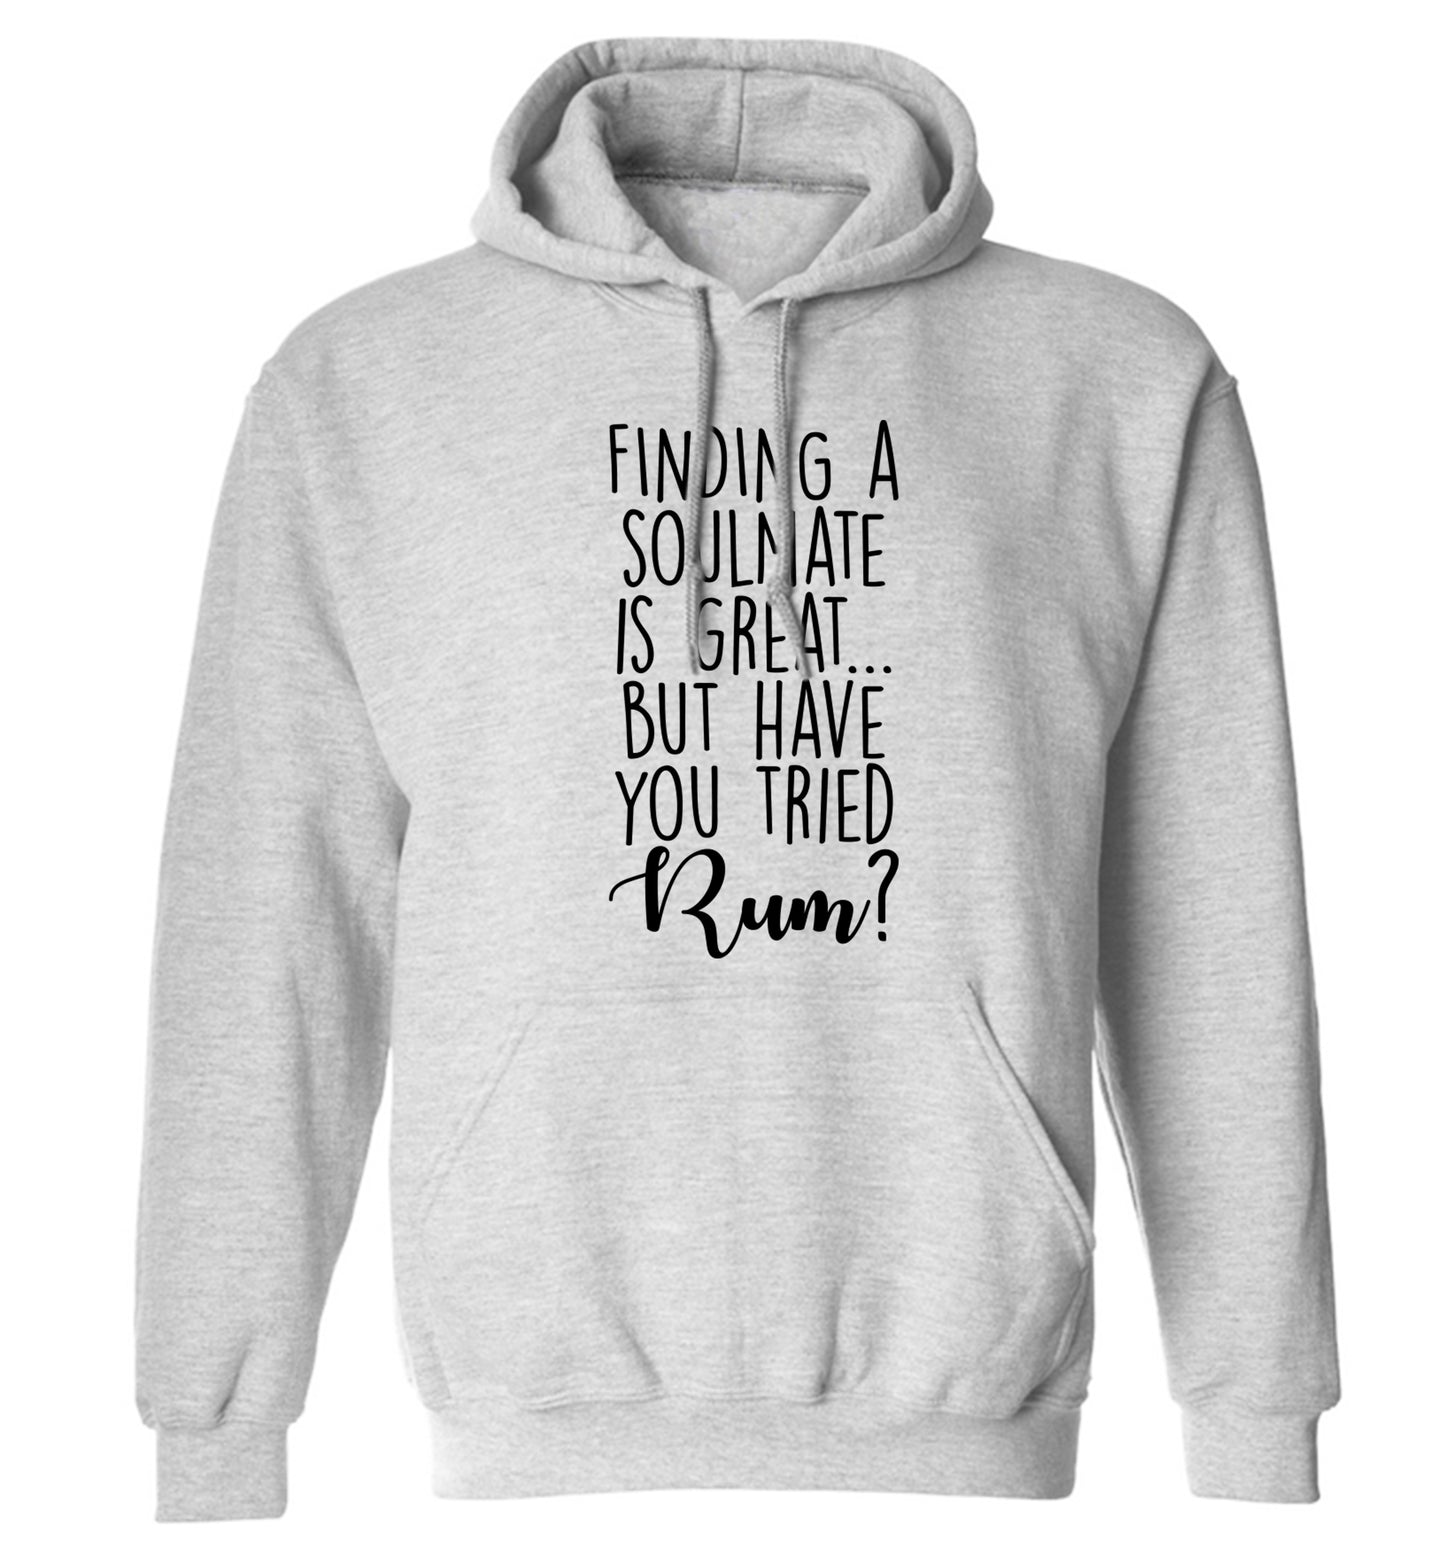 Finding a soulmate is great but have you tried rum? adults unisex grey hoodie 2XL